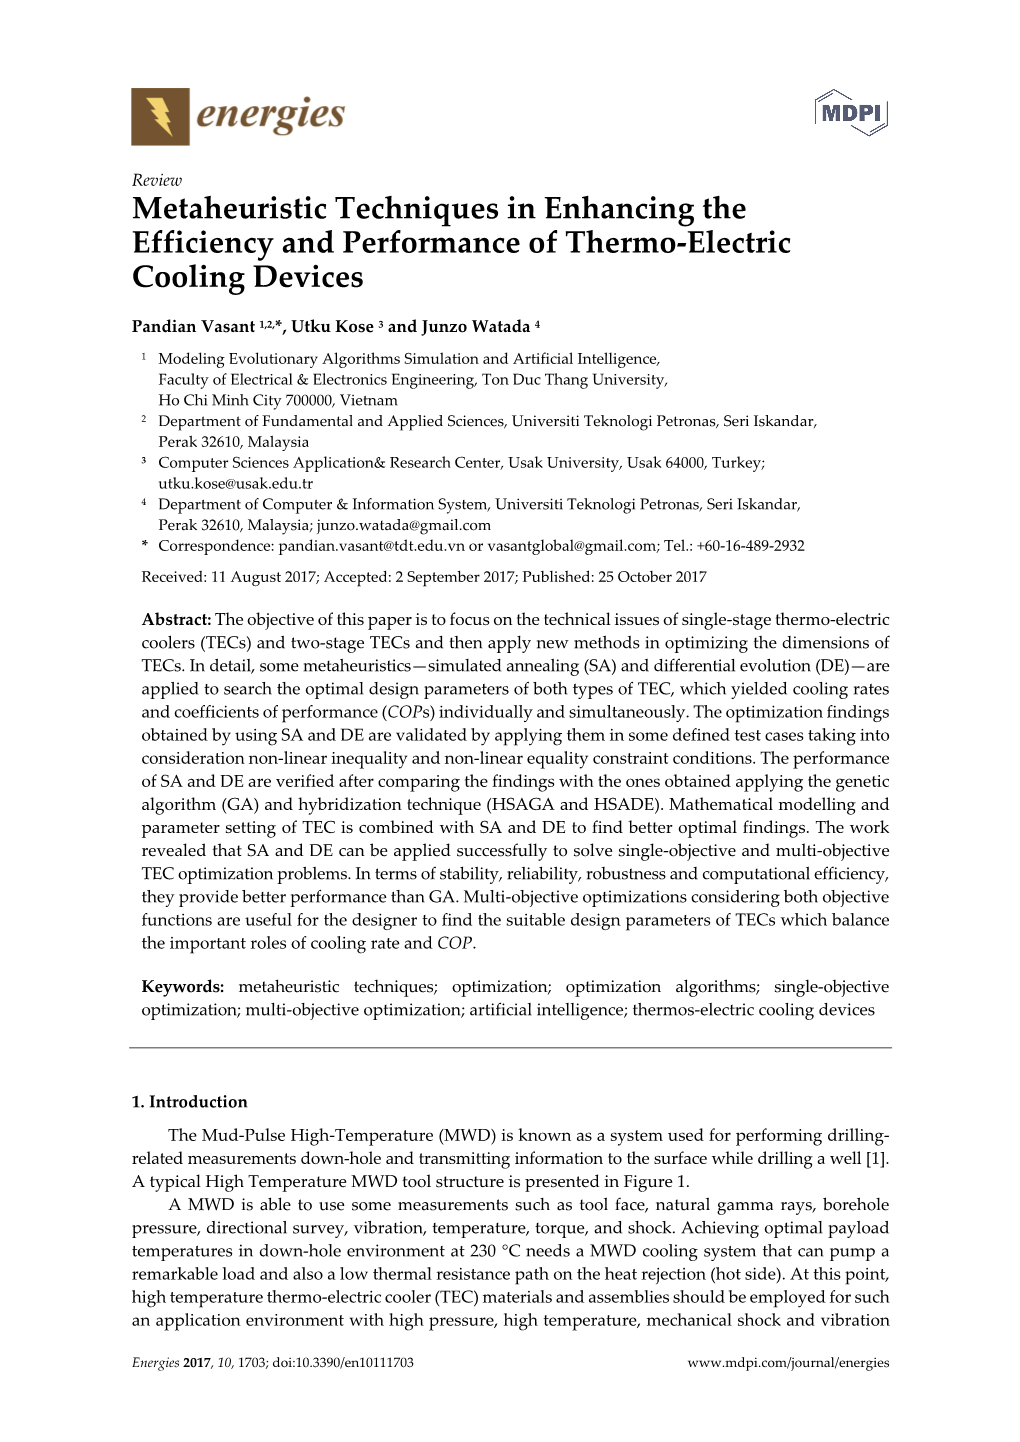 Metaheuristic Techniques in Enhancing the Efficiency and Performance of Thermo-Electric Cooling Devices